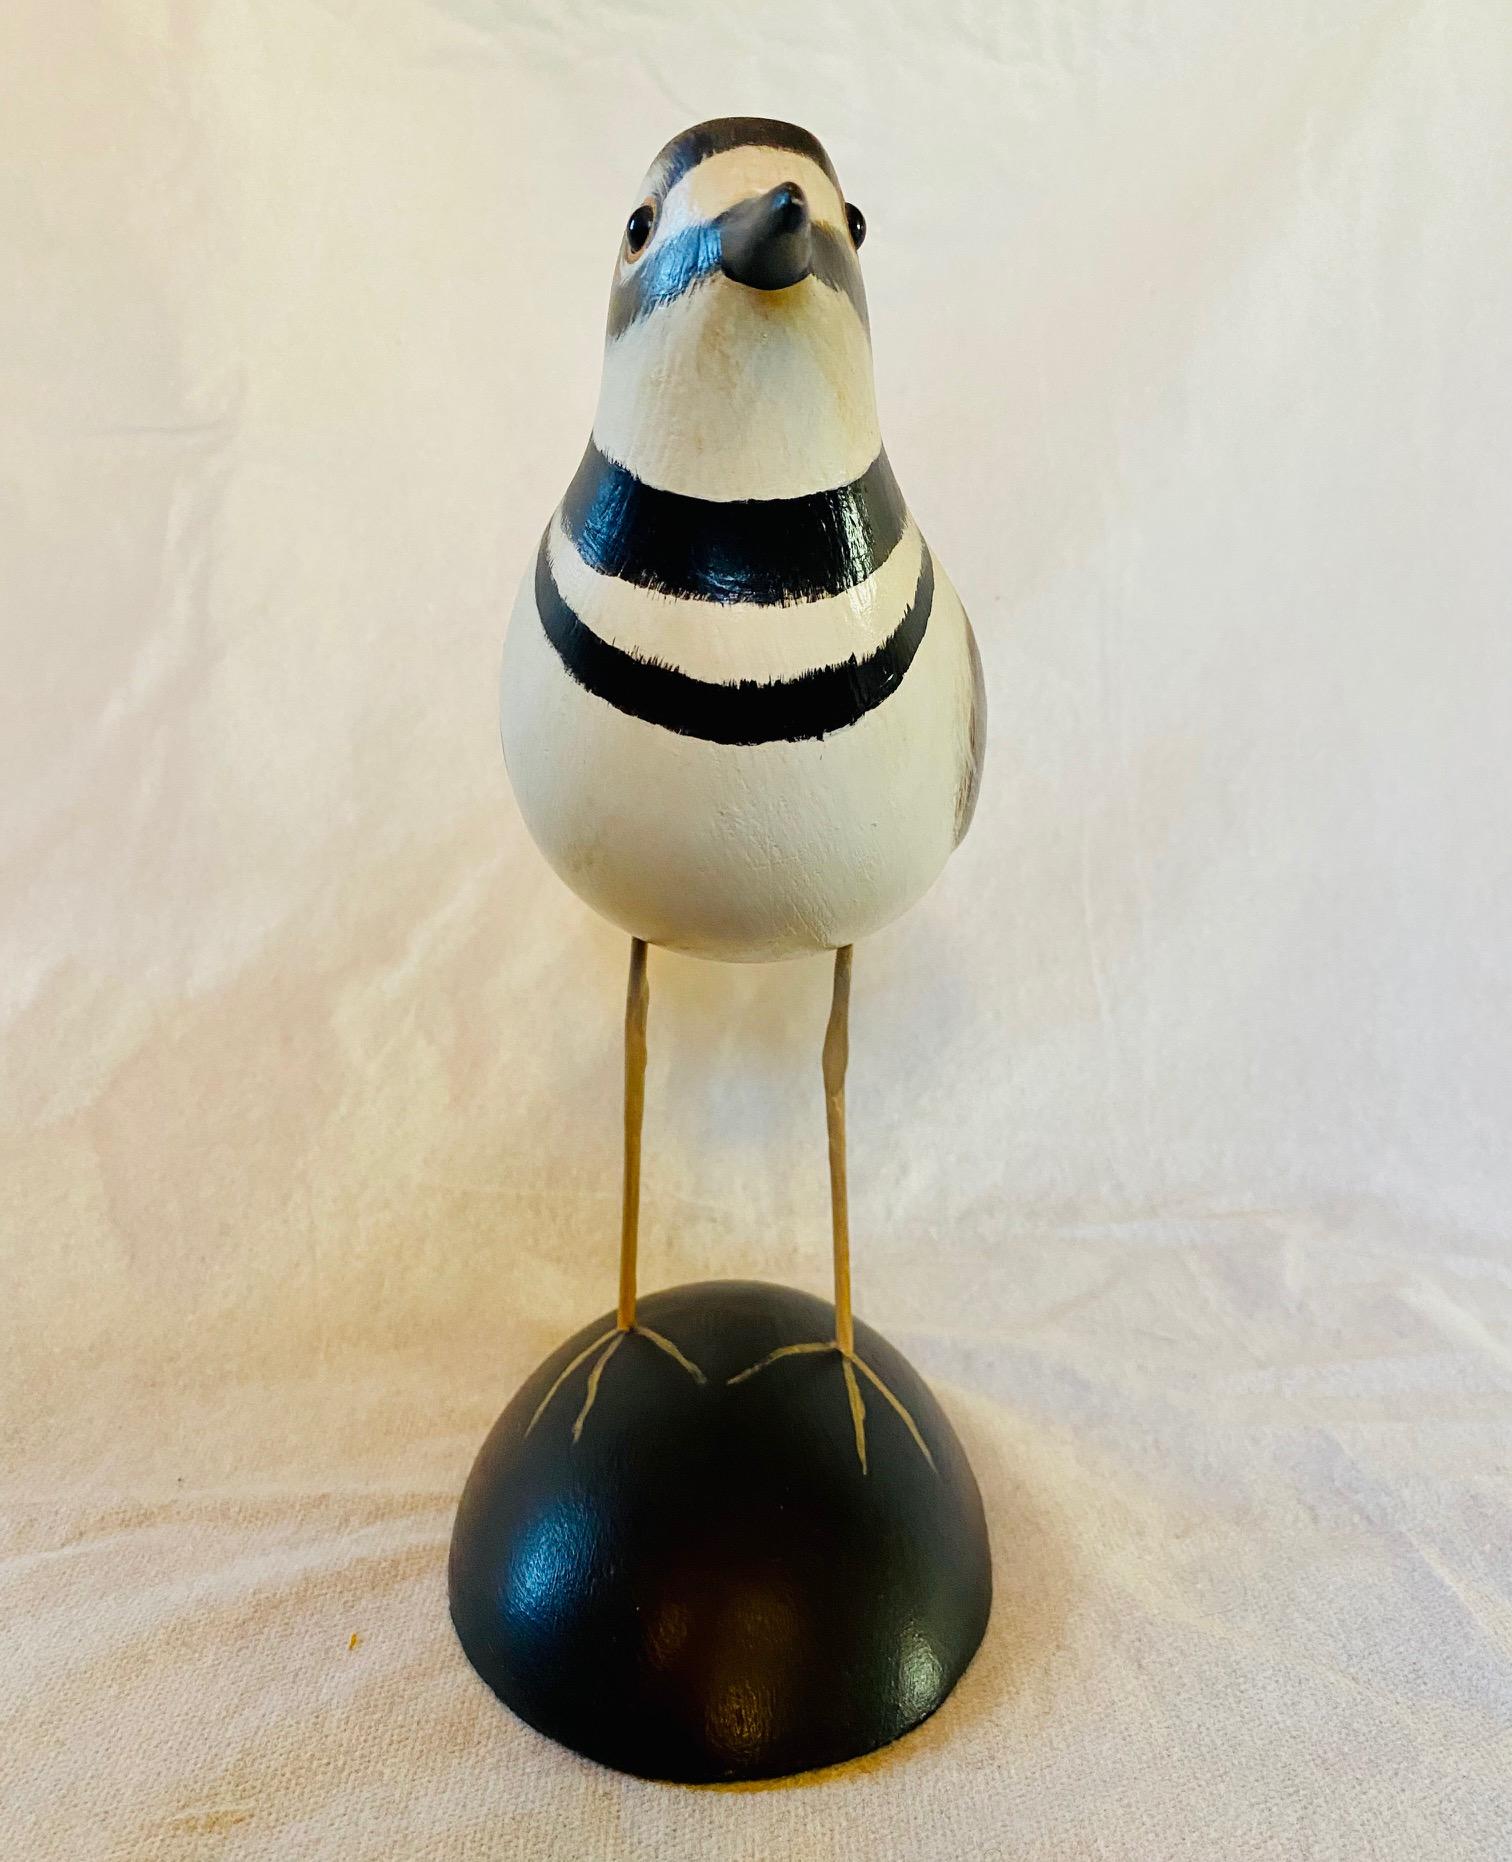 Carved and Polychromed Killdeer by Pat Gardner, Nantucket, 1973, a carved wooden alert shorebird with delicately painted plumage, glass eyes and wire legs, mounted on an ebonized domed base with painted feet, signed and dated on the belly, and